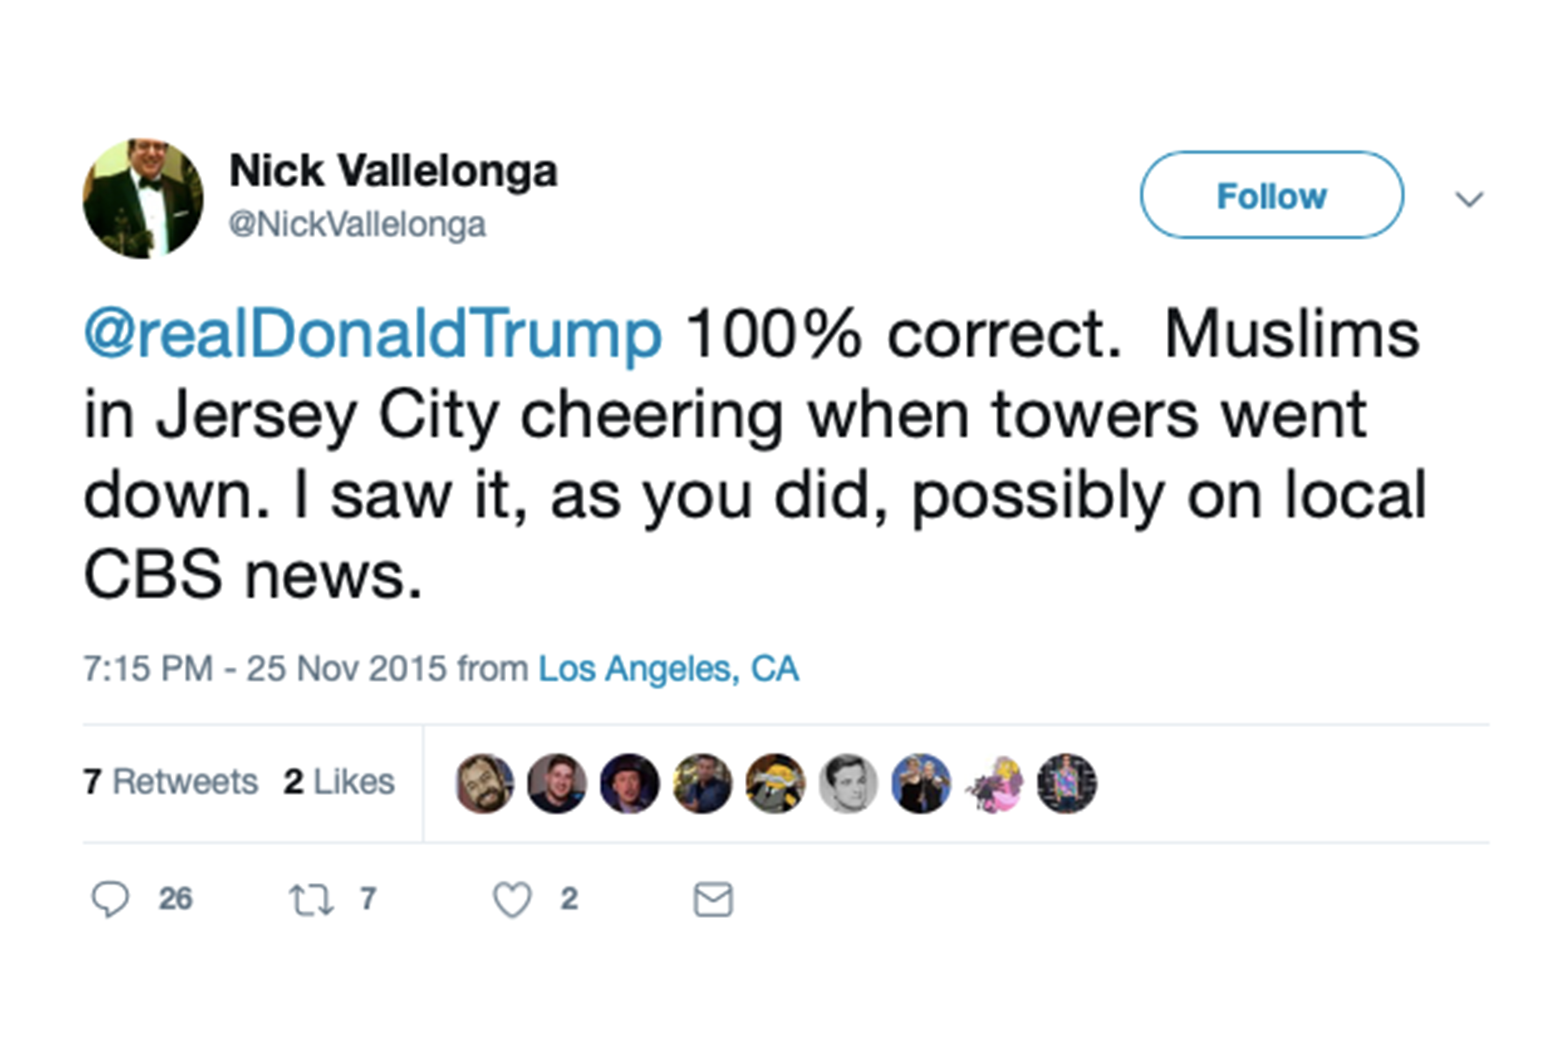 A tweet from Nick Vallelonga reading "@realDonaldTrump 100% correct. Muslims in Jersey City cheering when towers went down. I saw it, as you did, possibly on local CBS news."